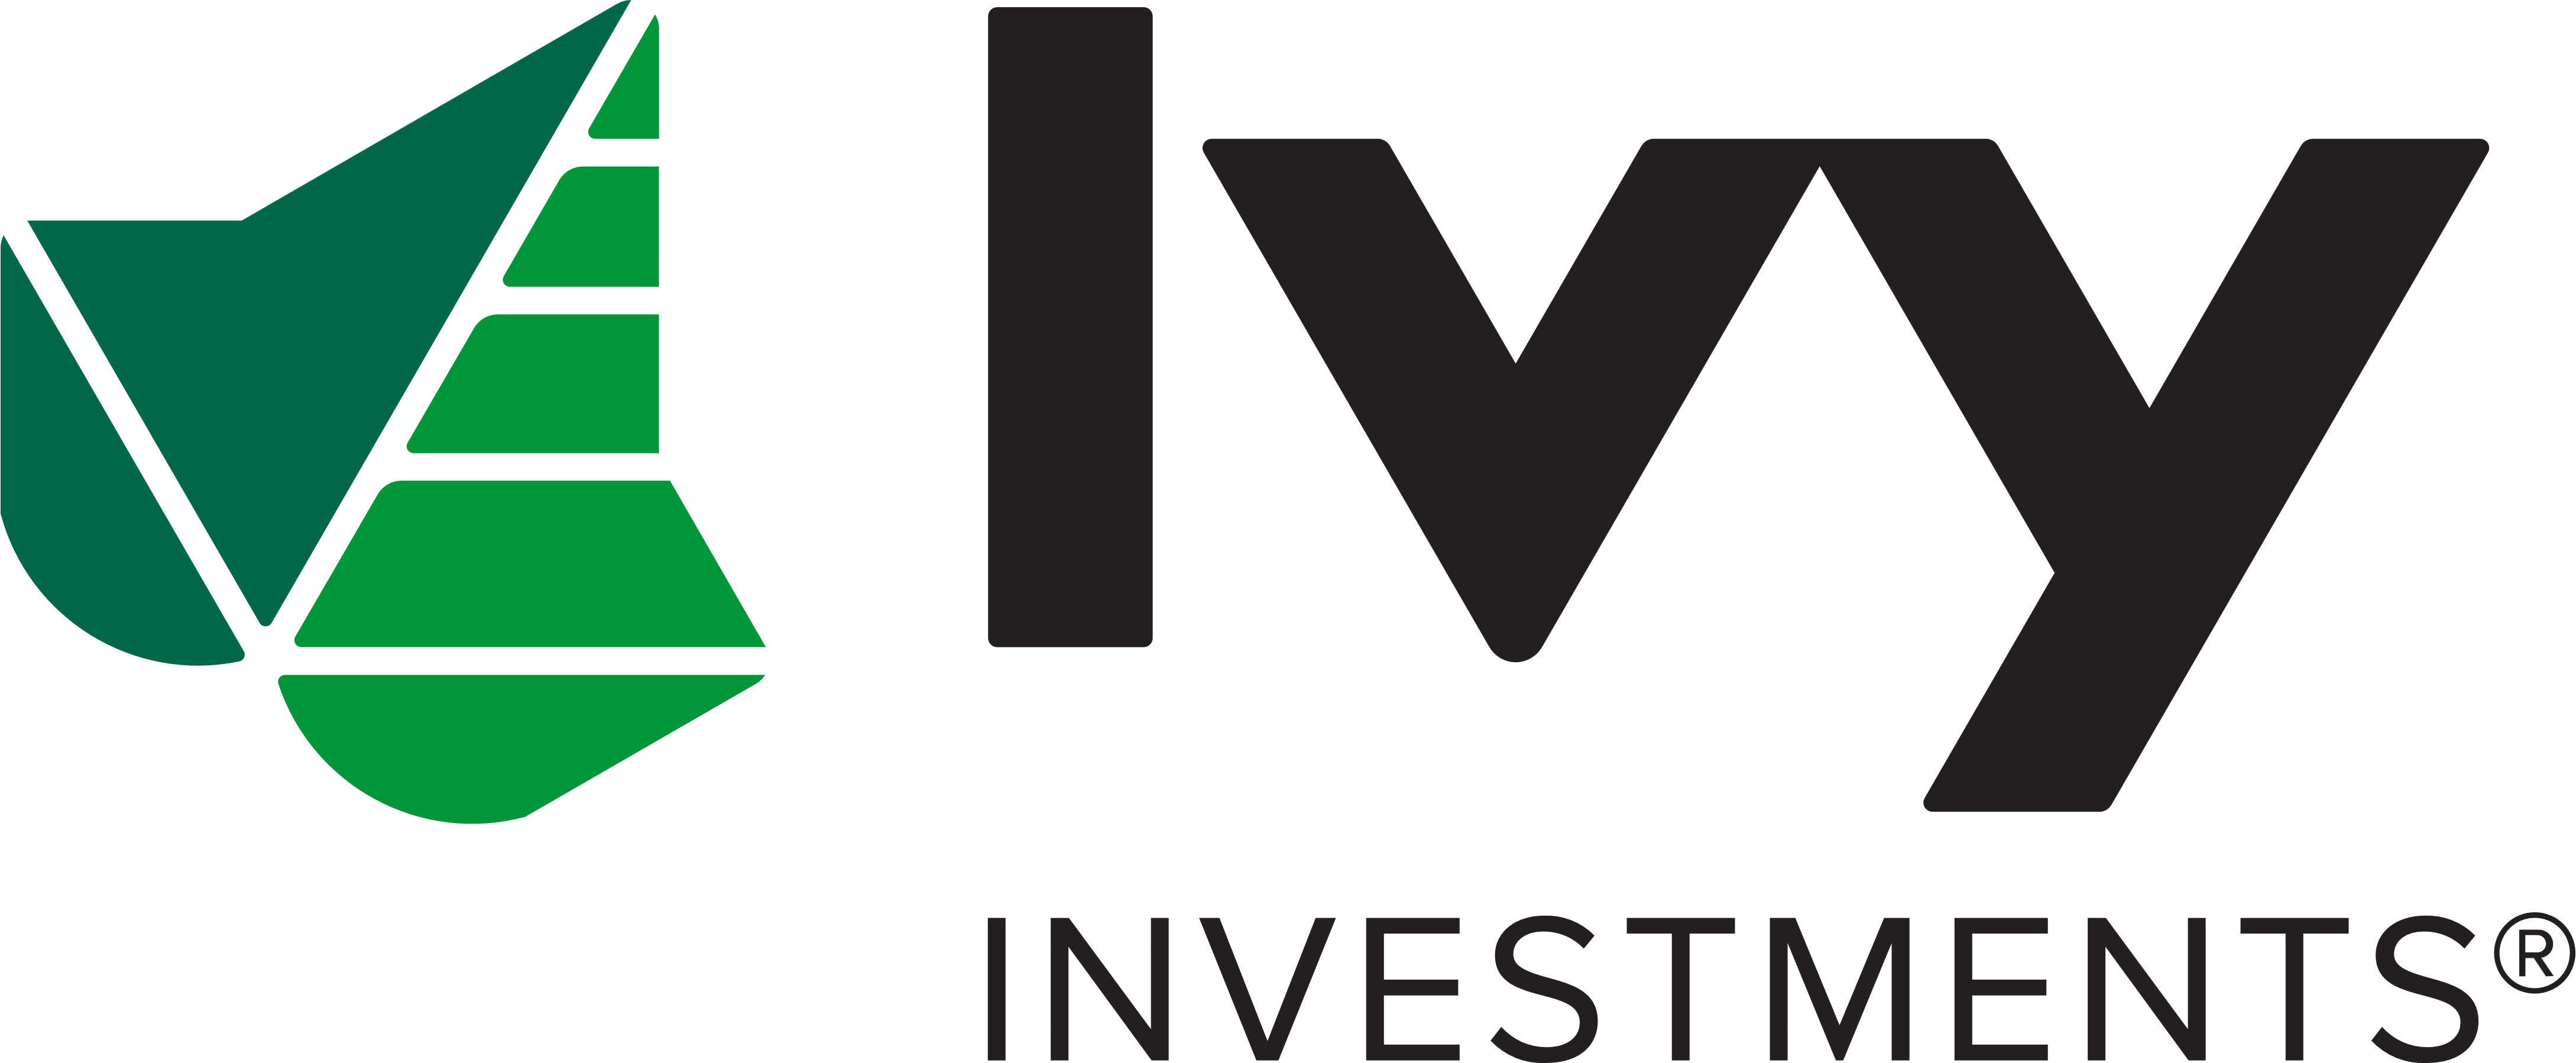 Ivy Logo - Ivy Investments – Logos Download